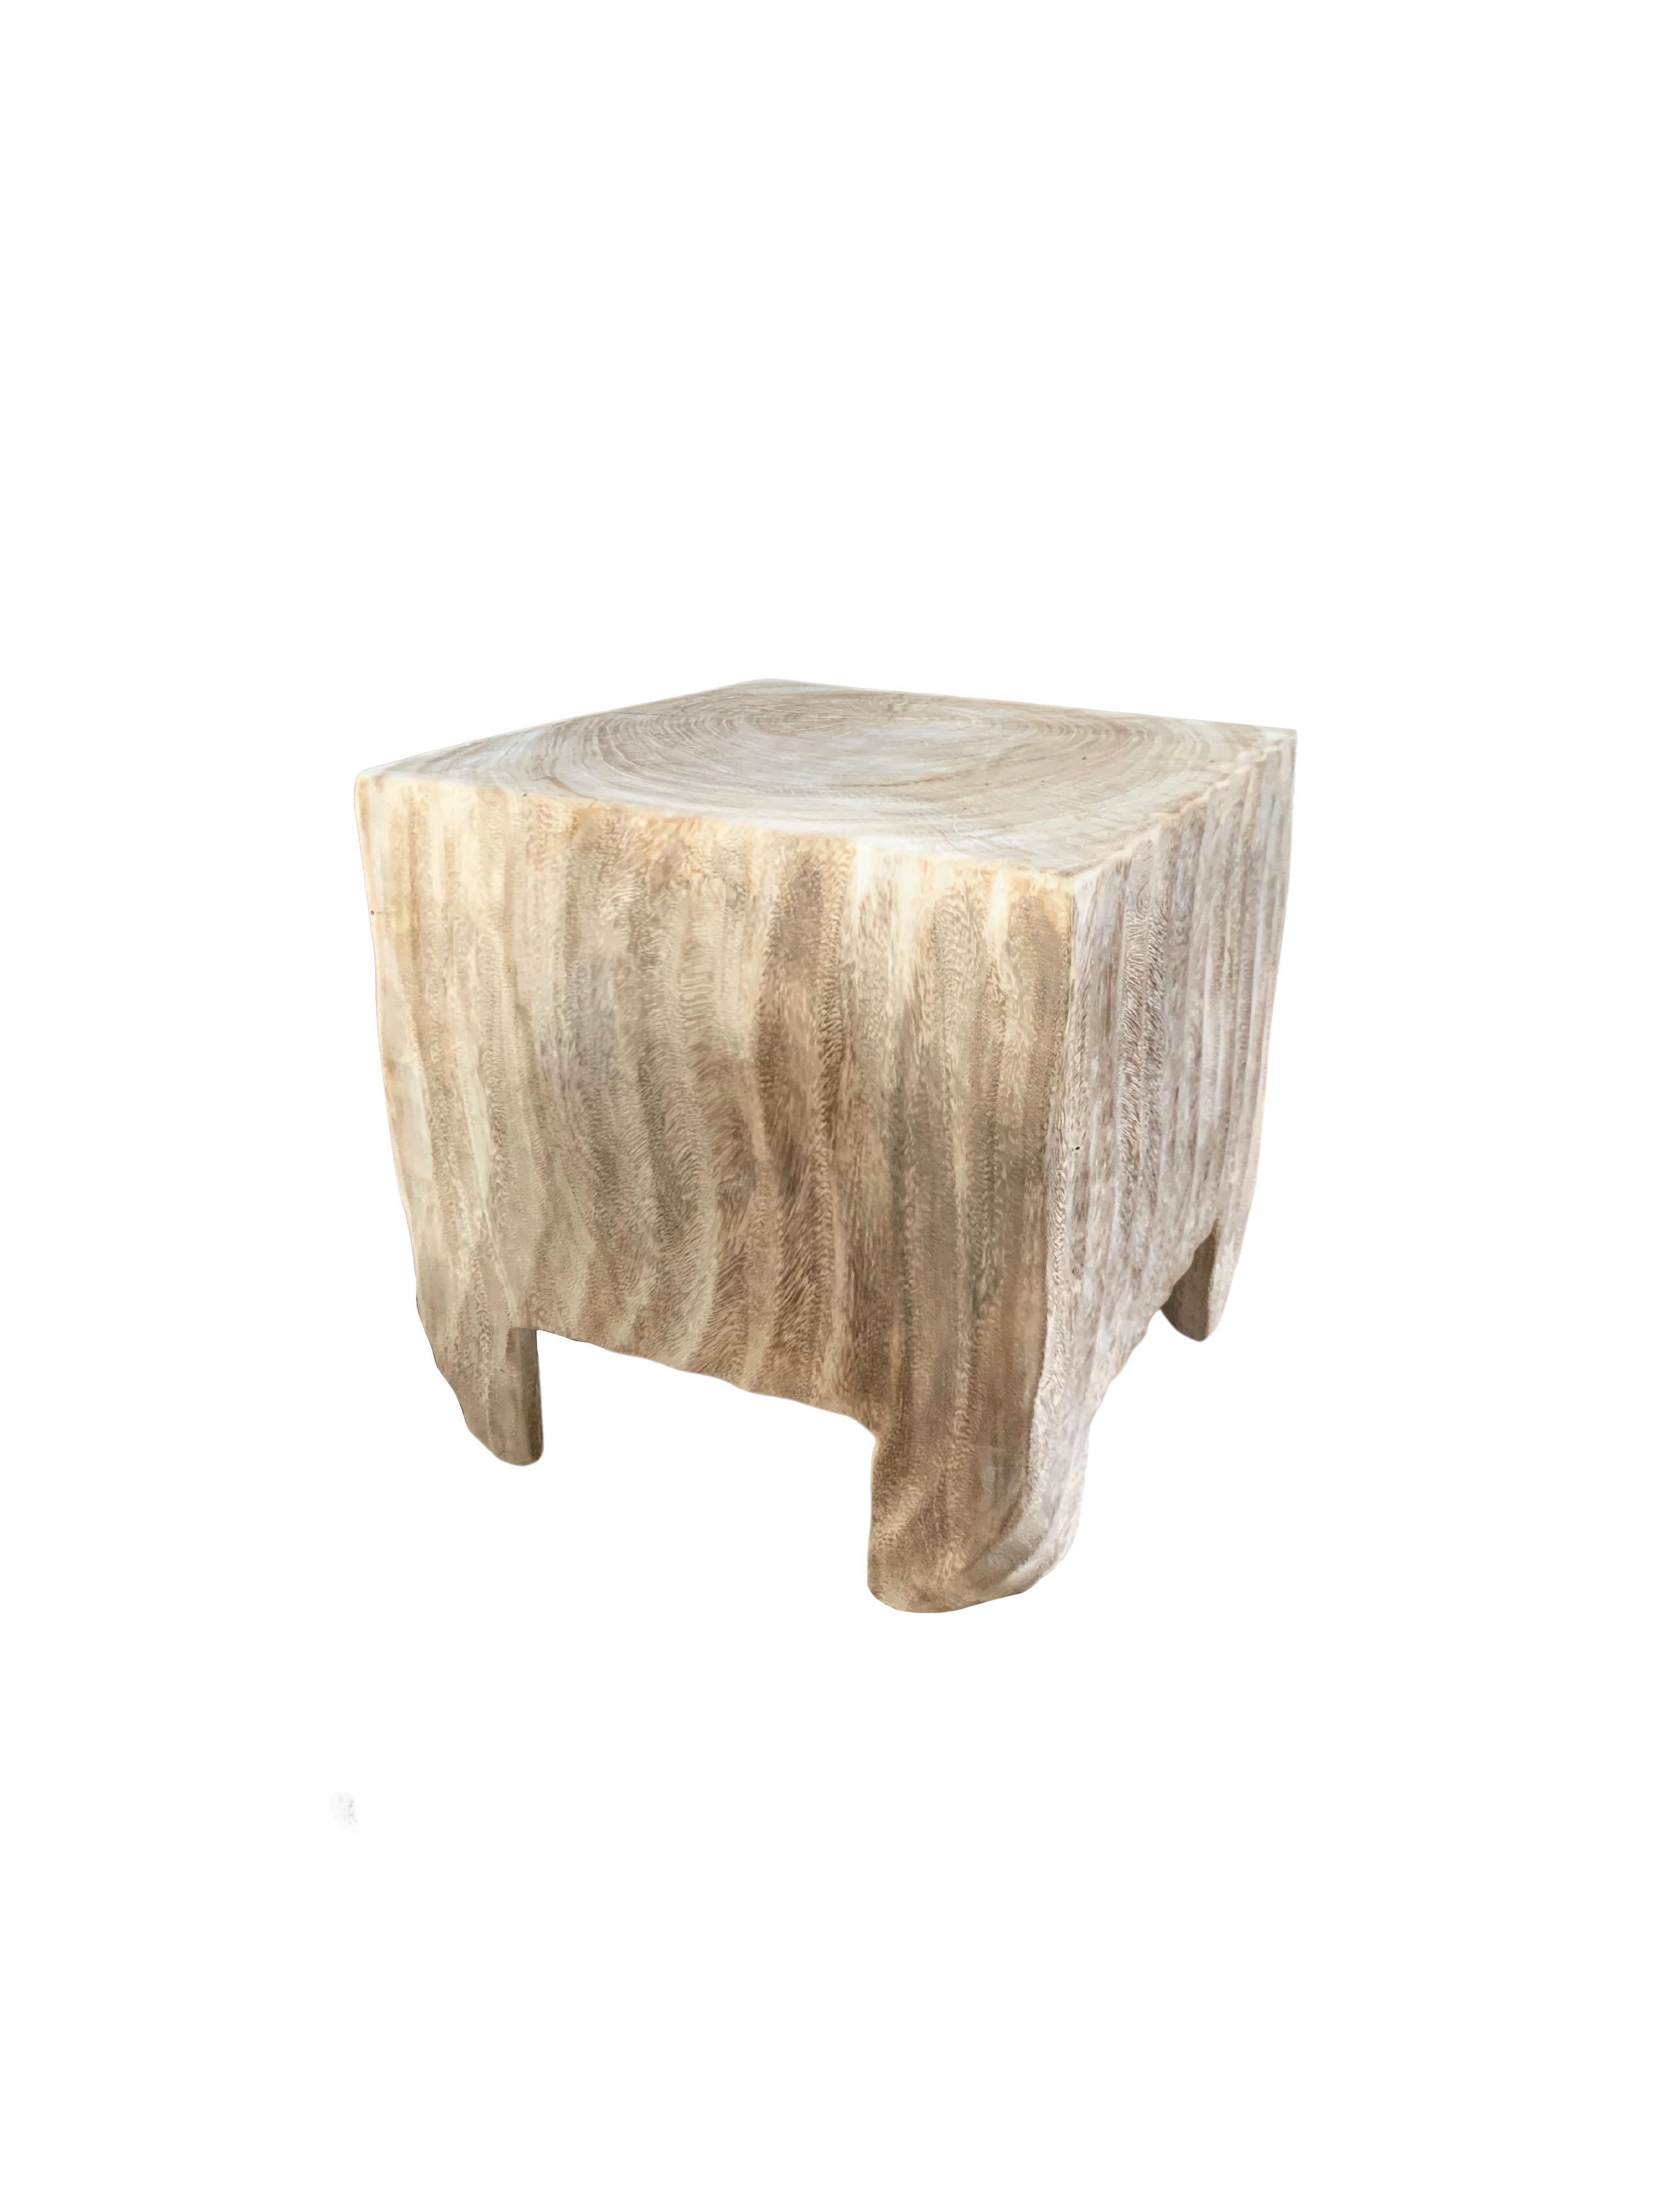 This wonderfully sculptural round side table features a ribbed pattern along its sides. The table's neutral pigment makes it perfect for any space. A uniquely sculptural and versatile piece certain to invoke conversation. It was crafted from a solid